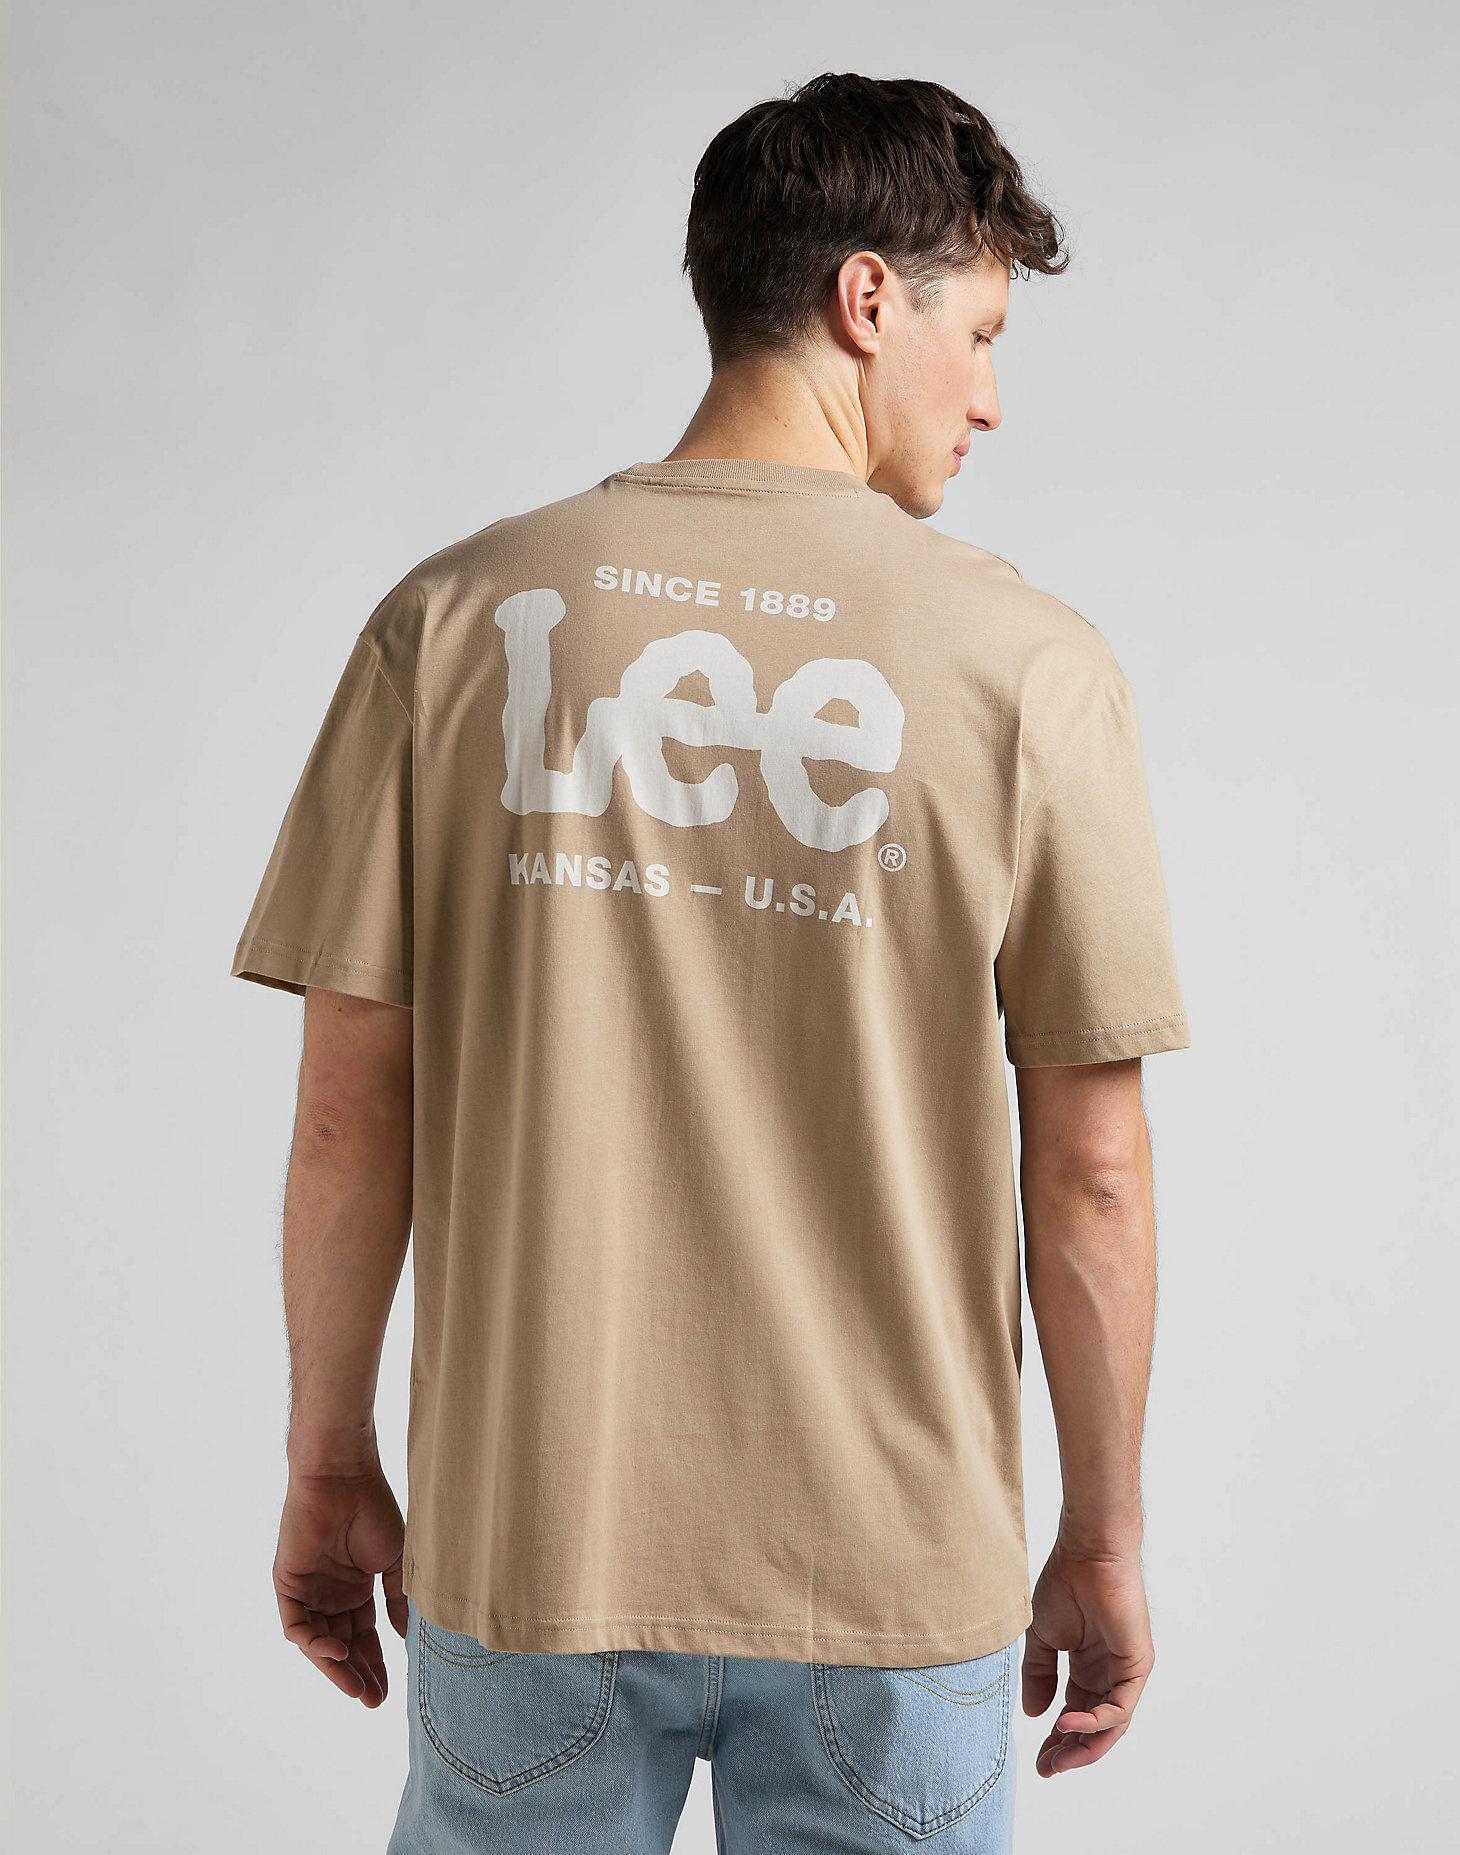 Logo Loose Tee in Clay alternative view 1